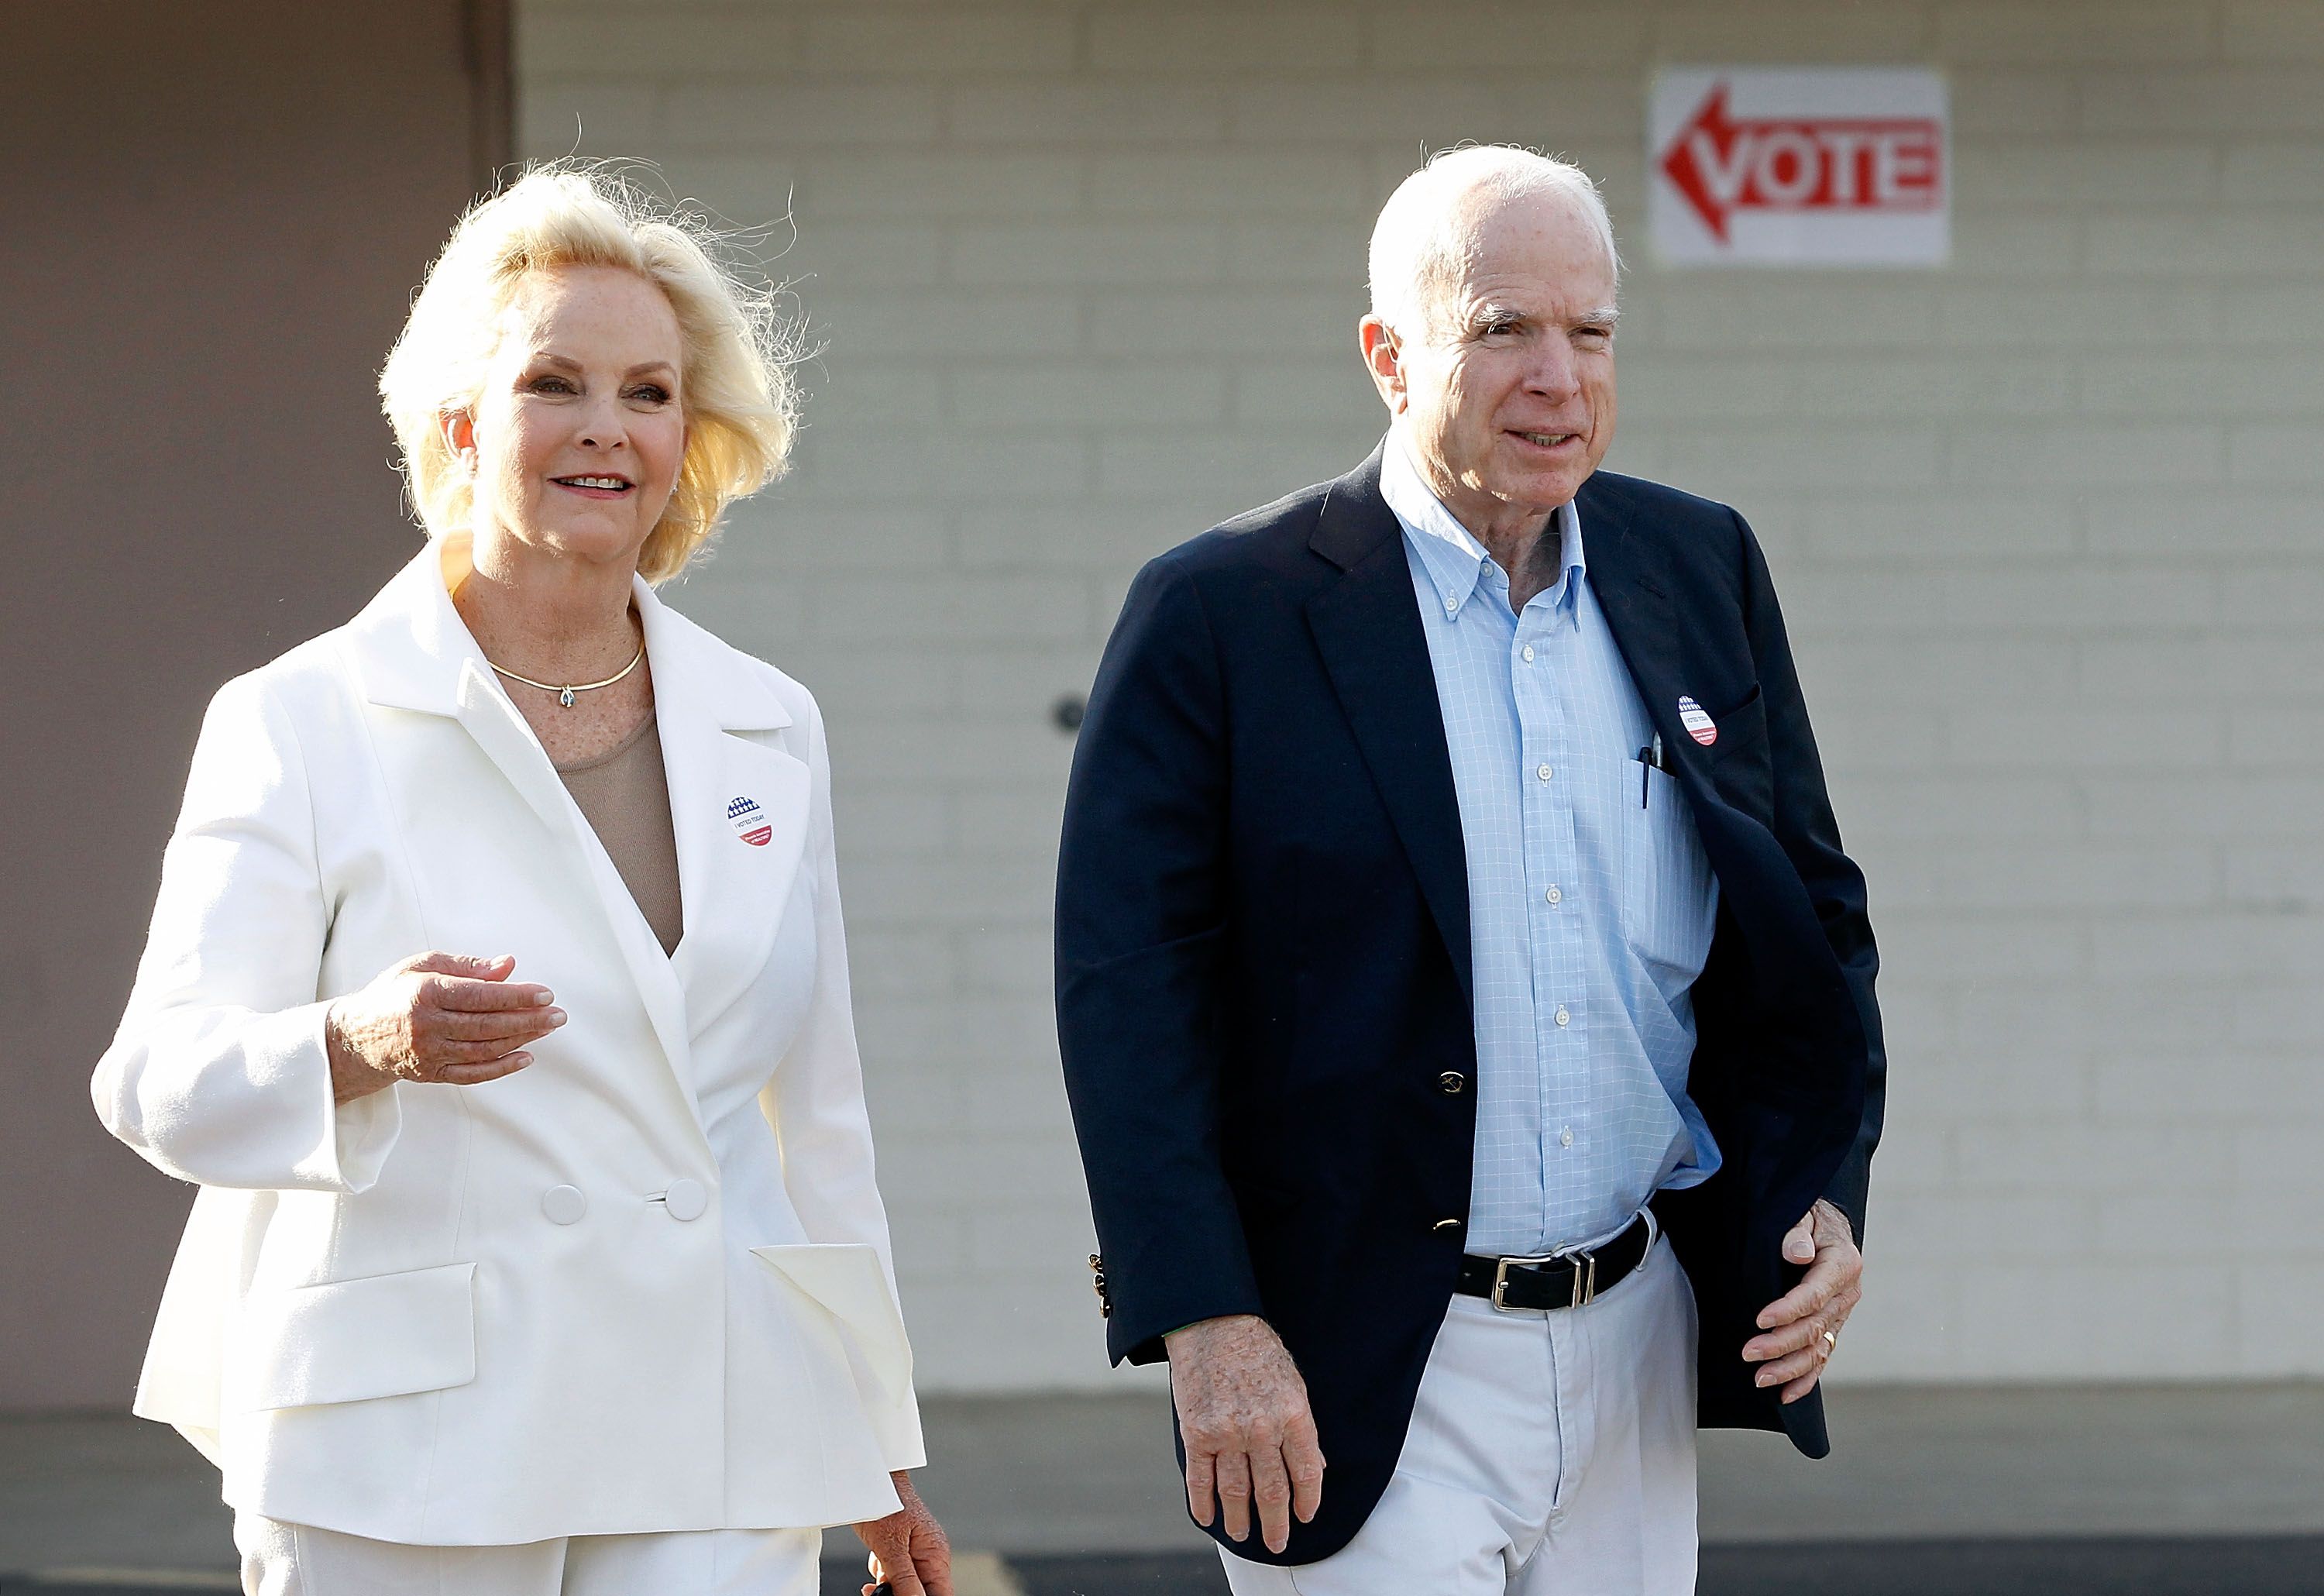 Sen. John McCain and Cindy McCain exit the Mountain View Christian Church polling place after casting their vote on November 8, 2016 | Photo: Getty Images